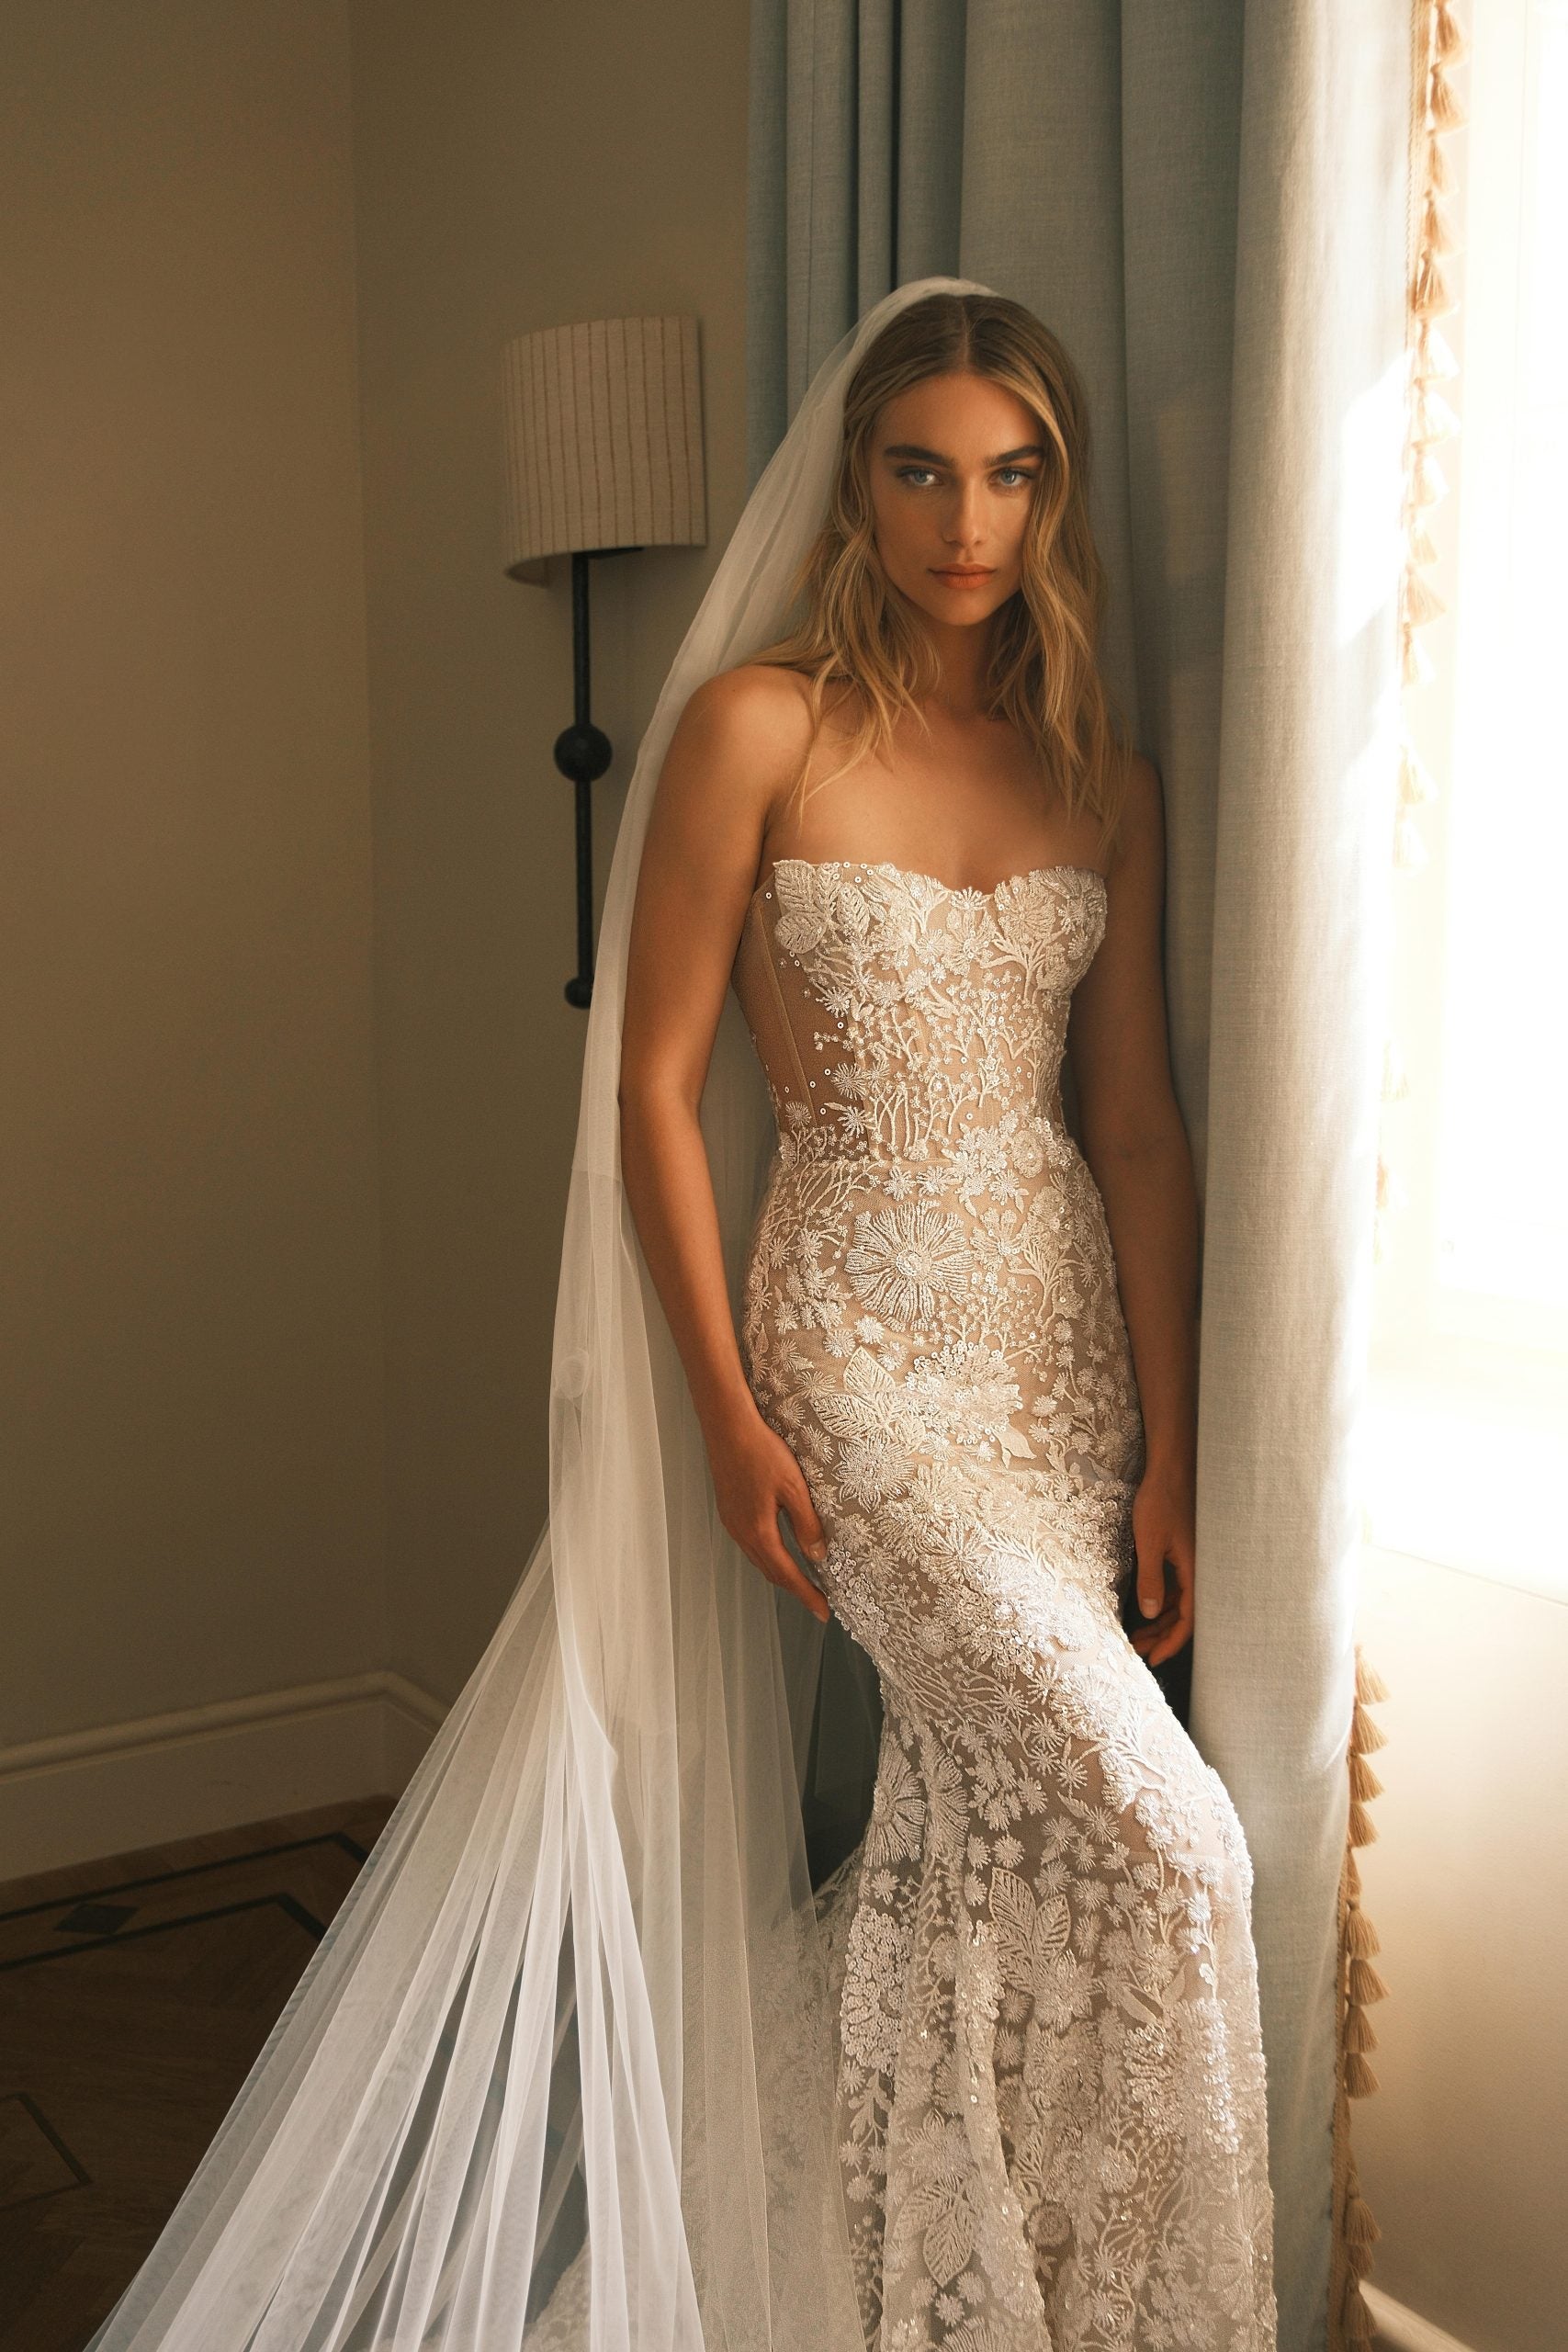 Strapless Lace Fit-and-Flare Gown With Detachable Sleeves by Lee Petra Grebenau - Image 1